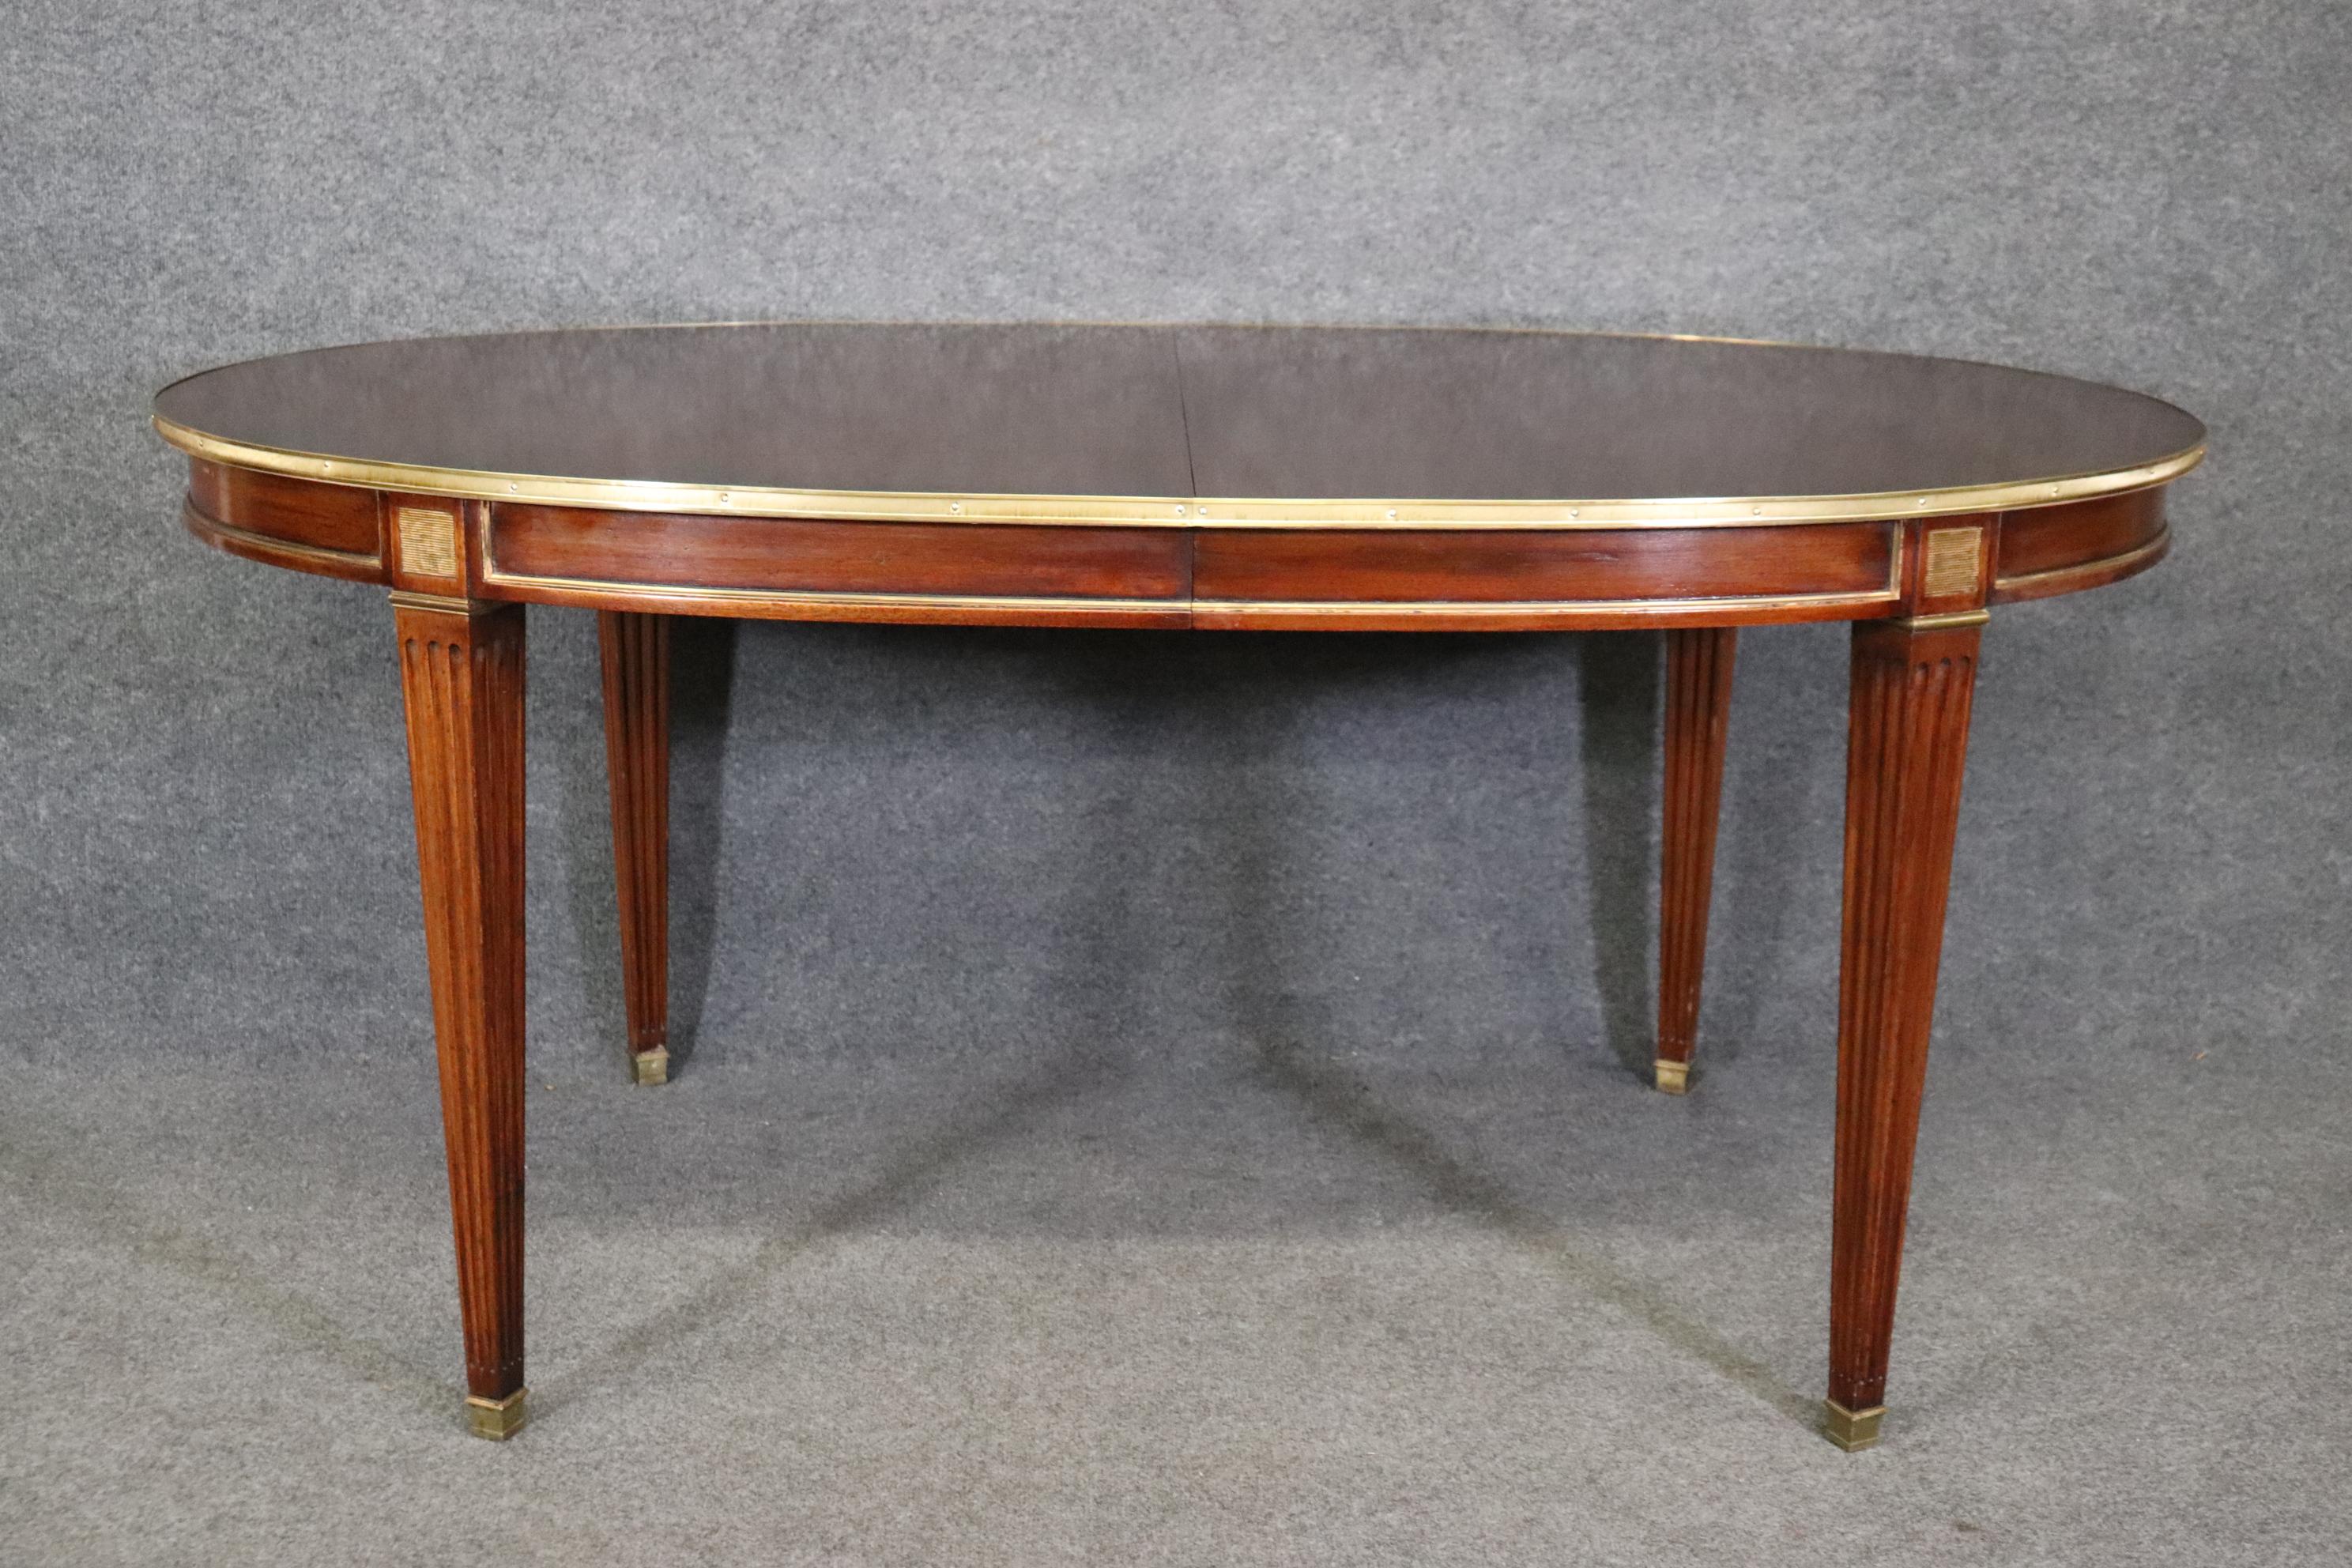 Argentine Louis XVI Directoire Style Maison Jansen Dining Room Table with 1 Leaf